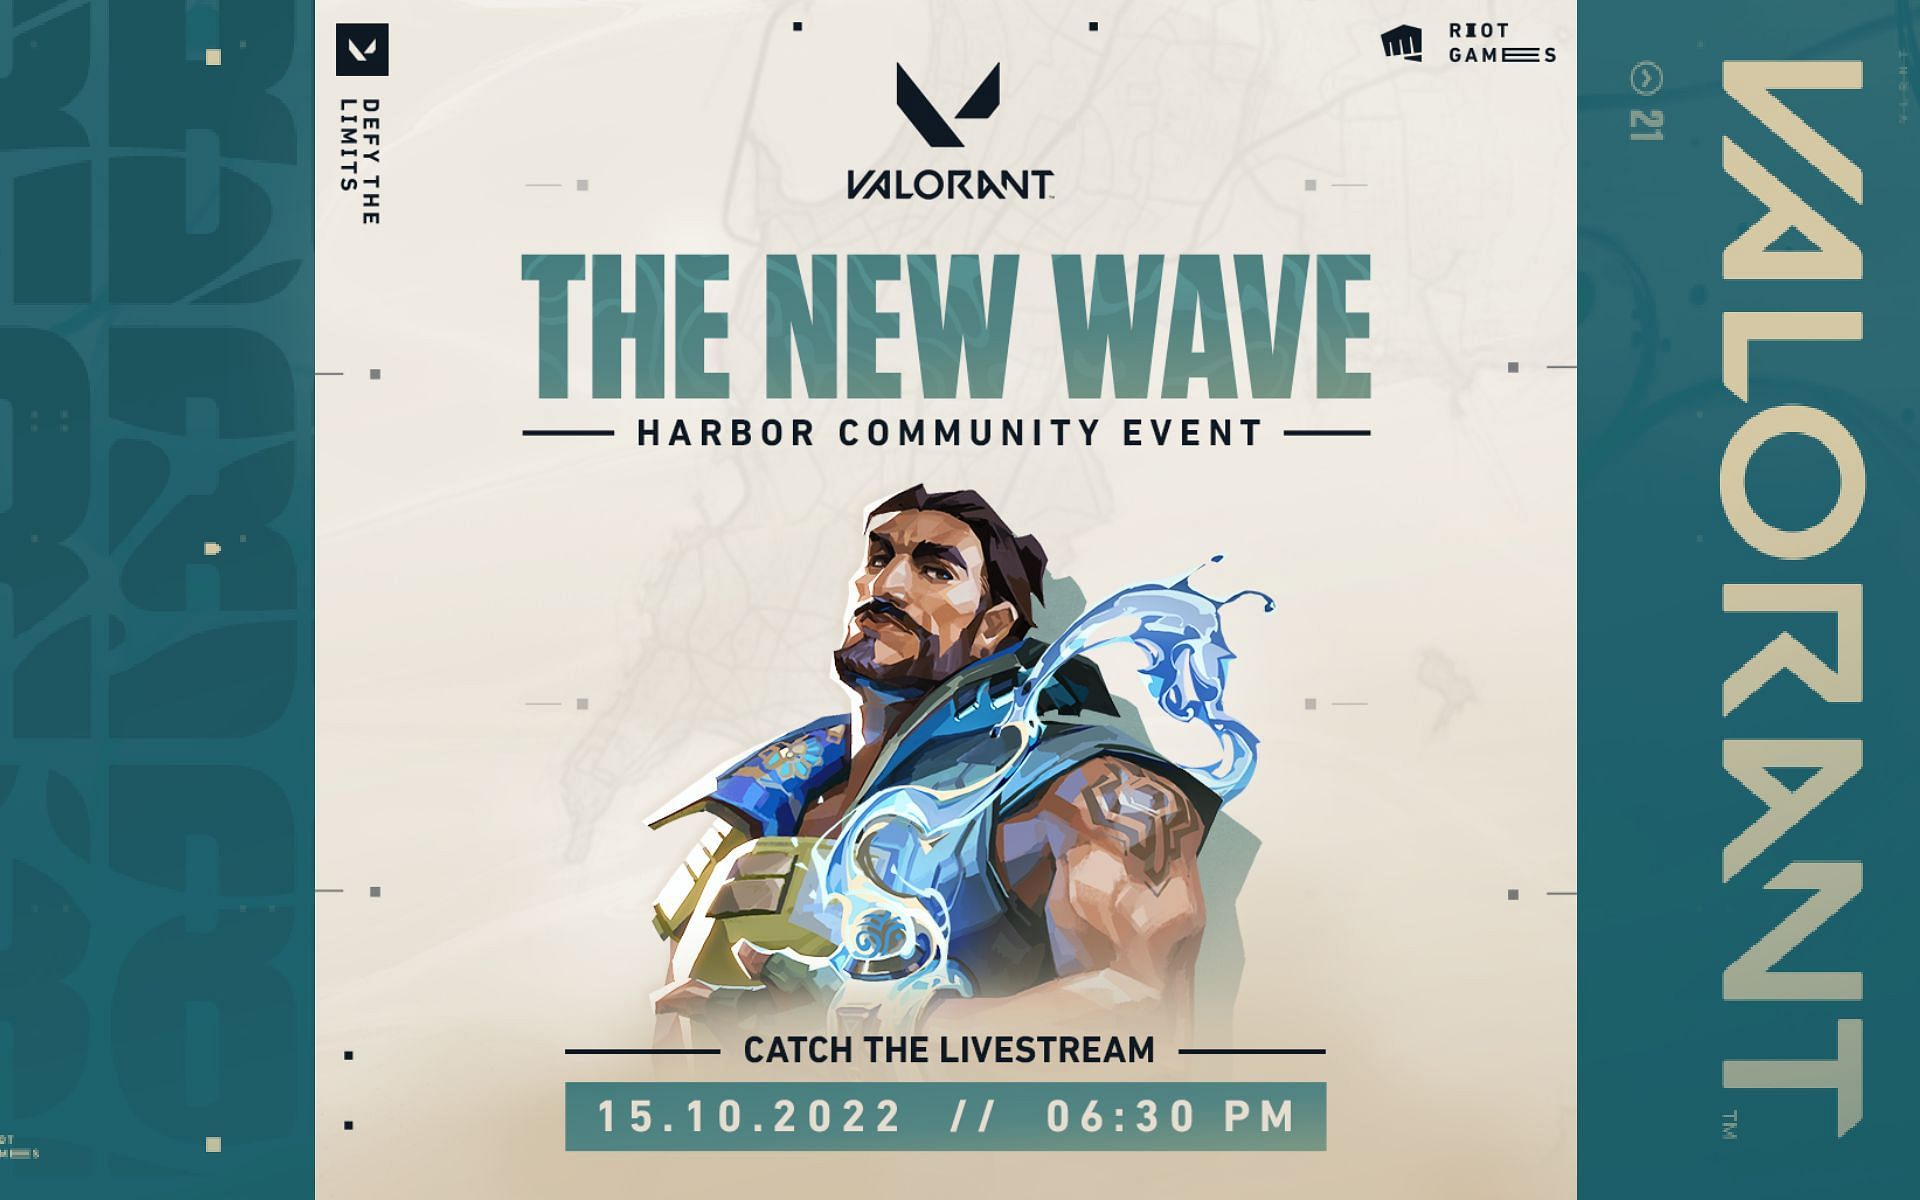 Valorant The New Wave event details